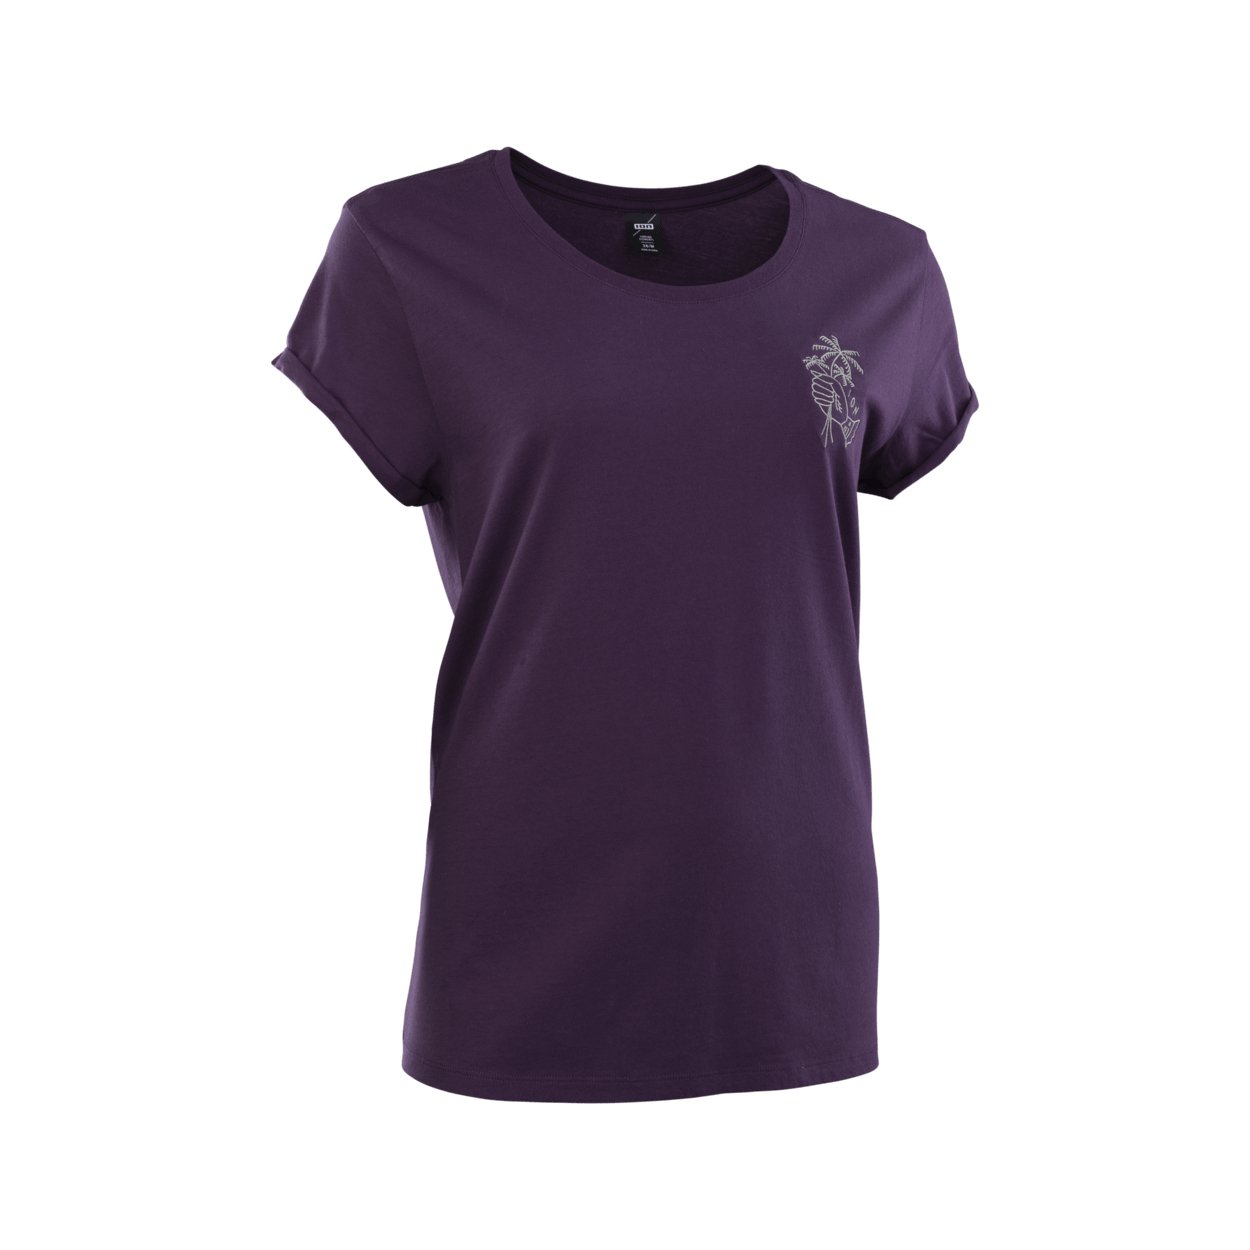 ION Tee Graphic SS women 2024 - Worthing Watersports - 9010583163512 - Apparel - ION Bike